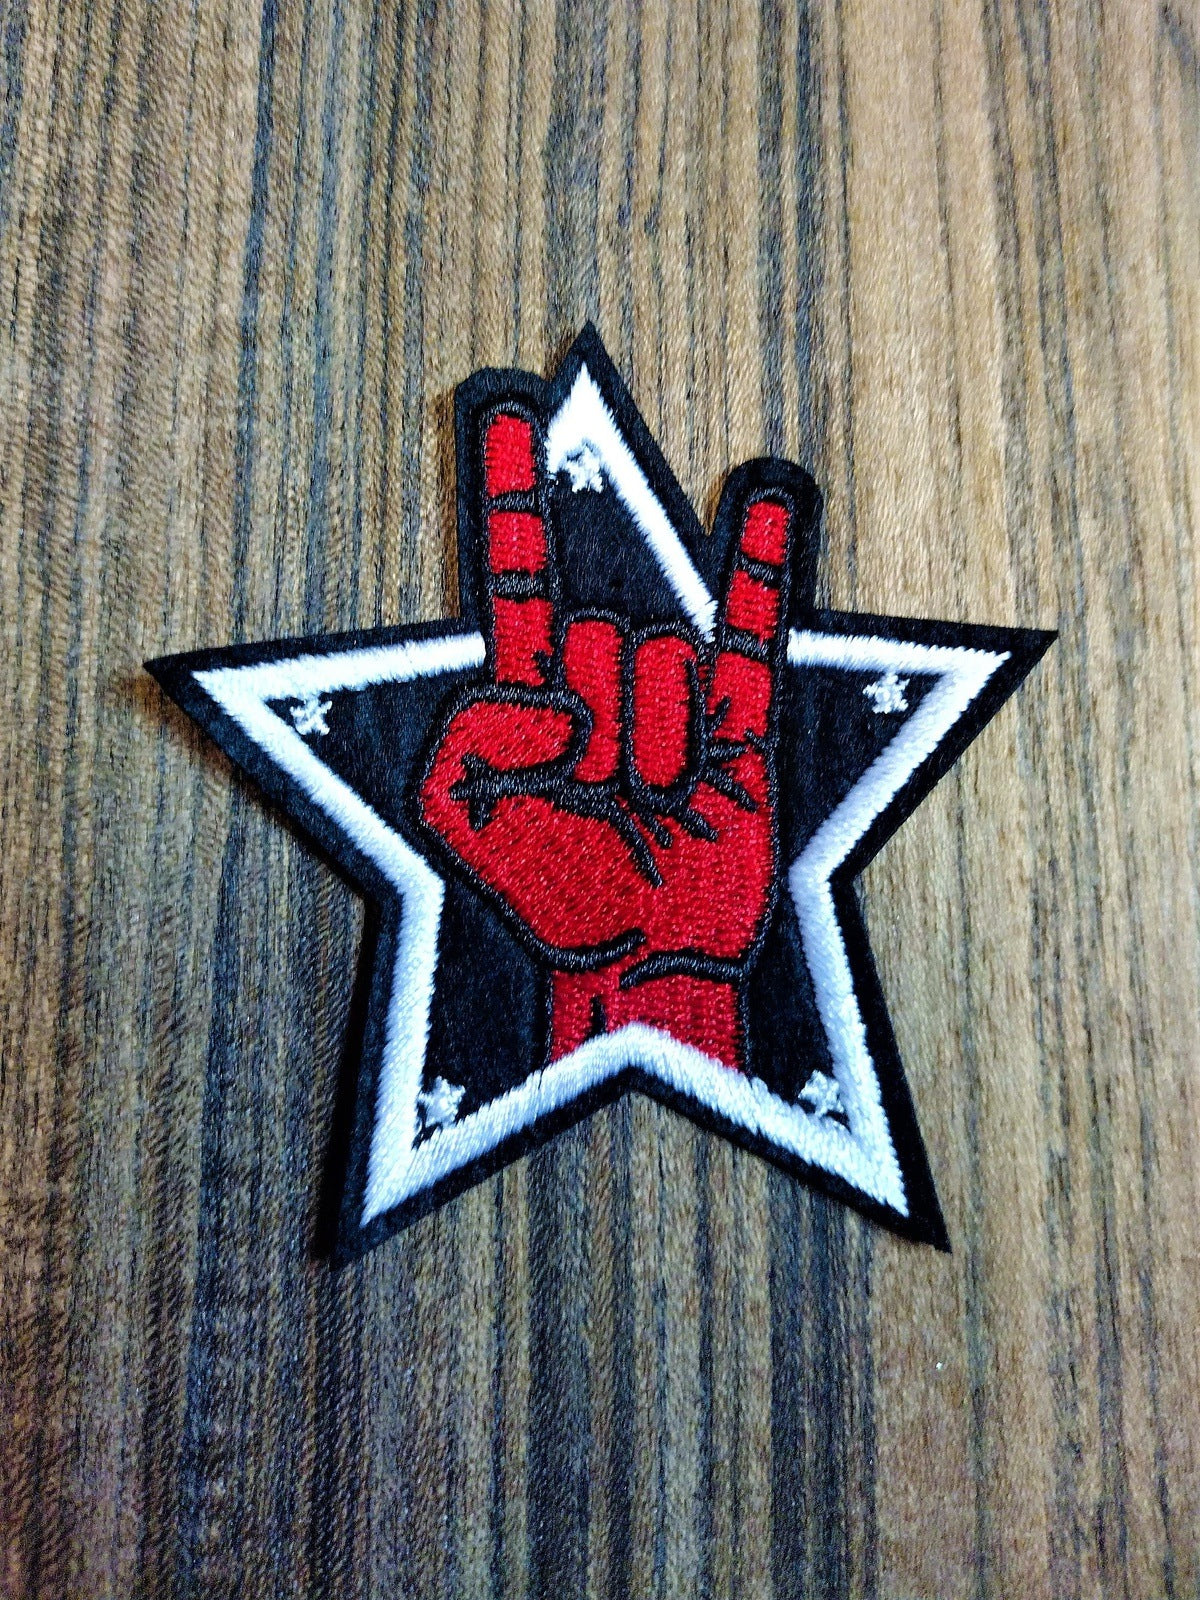 Rockstar Star Patch approx. 3 inches